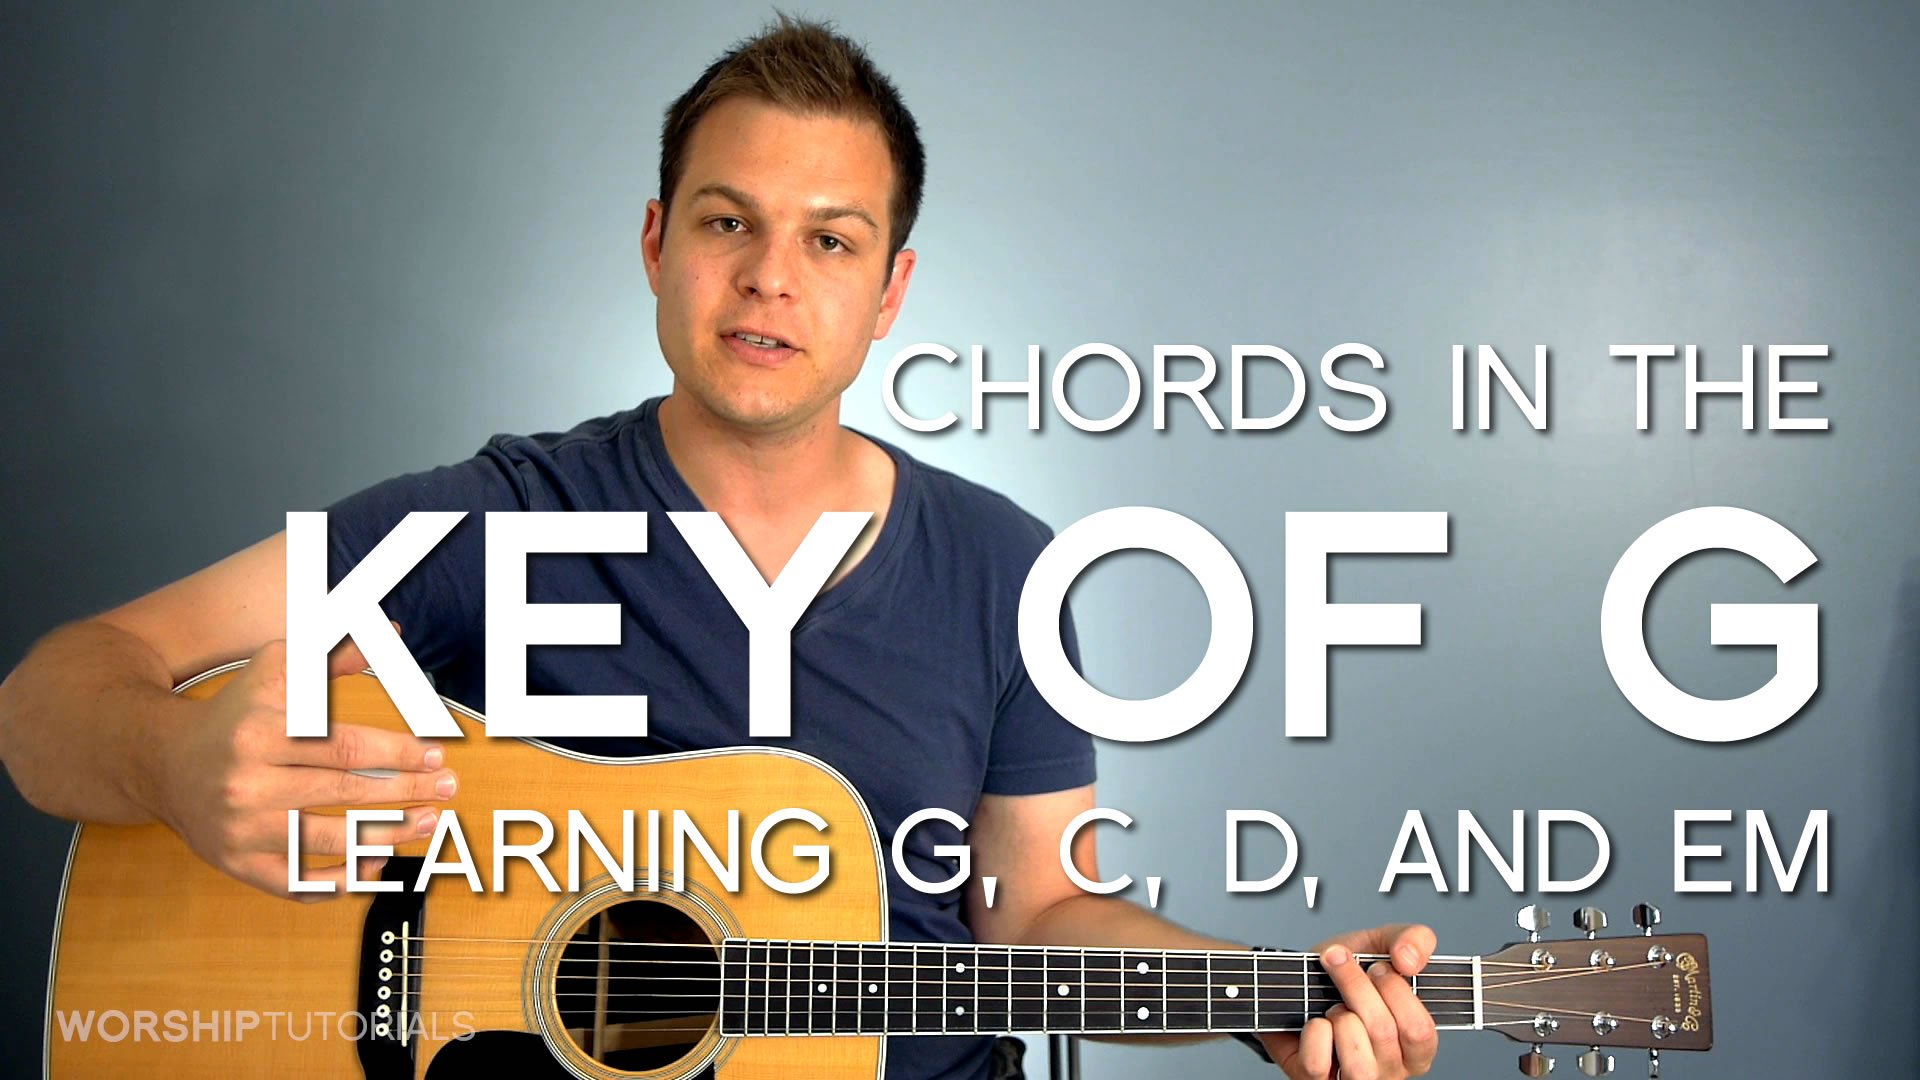 How To Play Guitar Chords Chords In The Key Of G How To Play G C D And Em Worship Tutorials